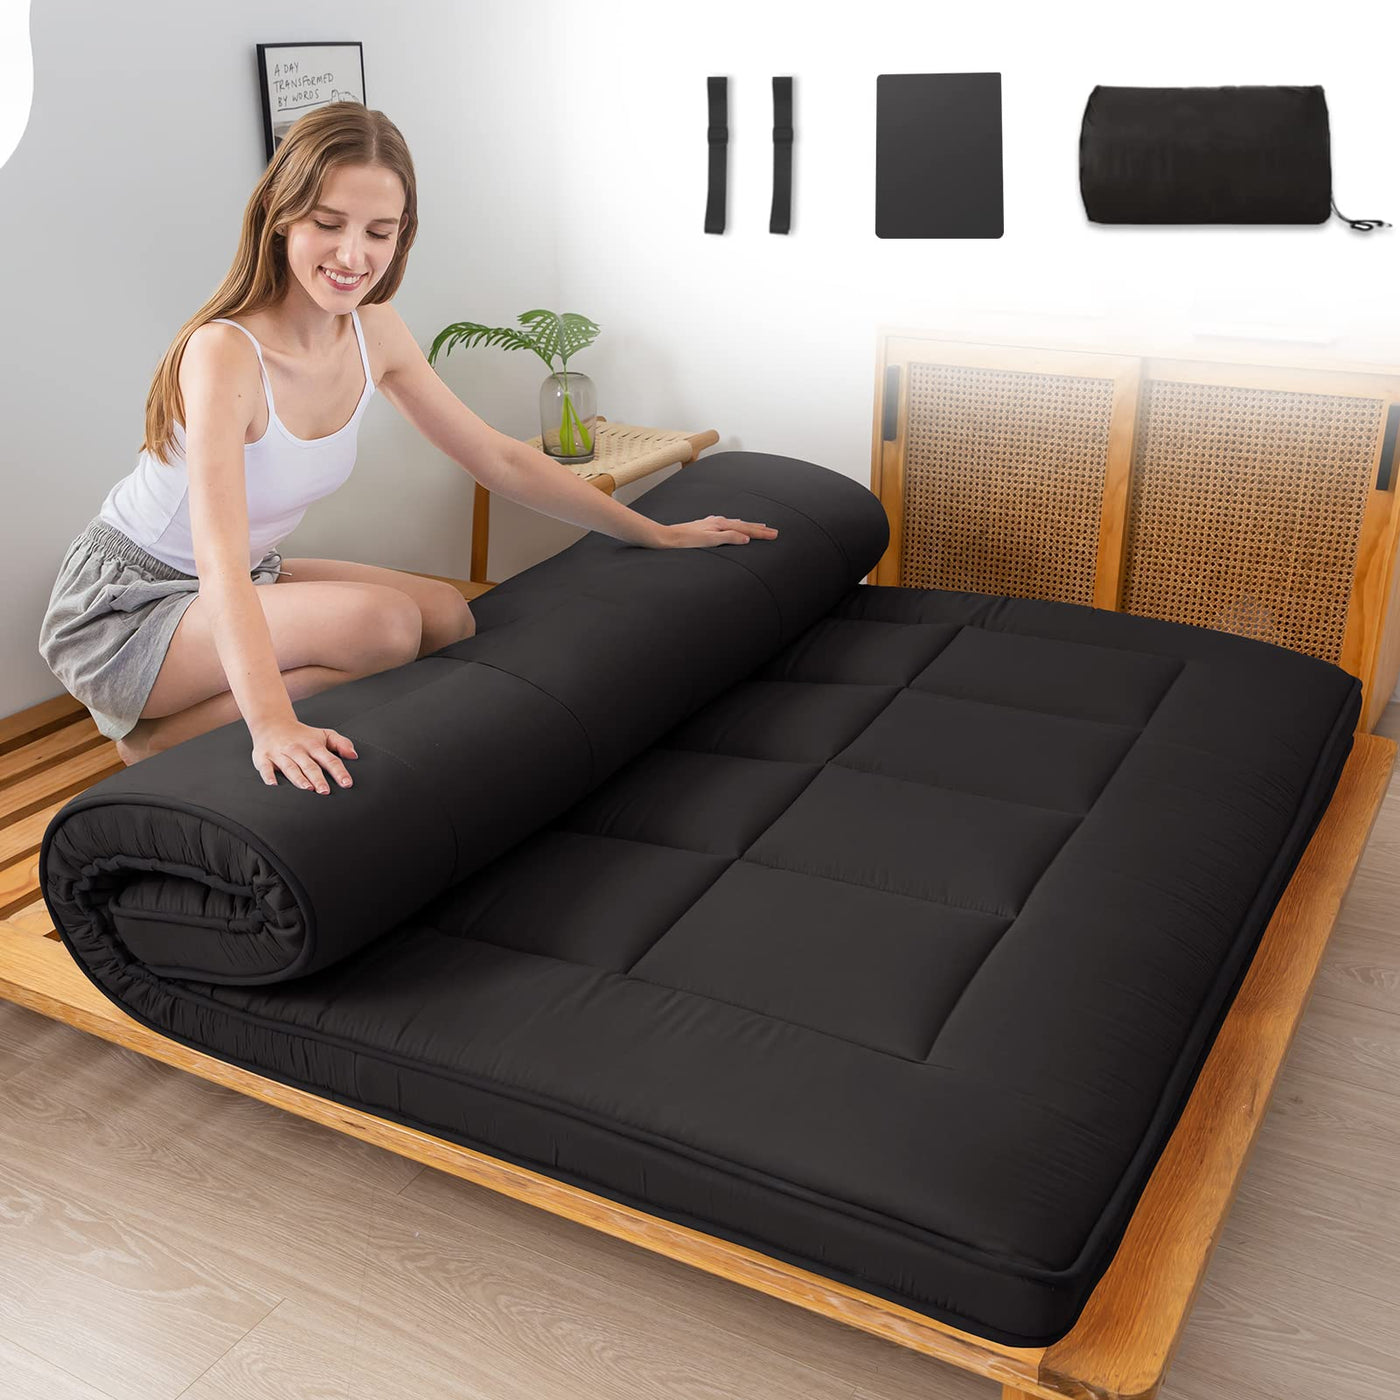 MAXYOYO Japanese Floor Mattress for Adults, 4" Thick Roll Up Floor Bed Futon Mattress Shikibuton, Black